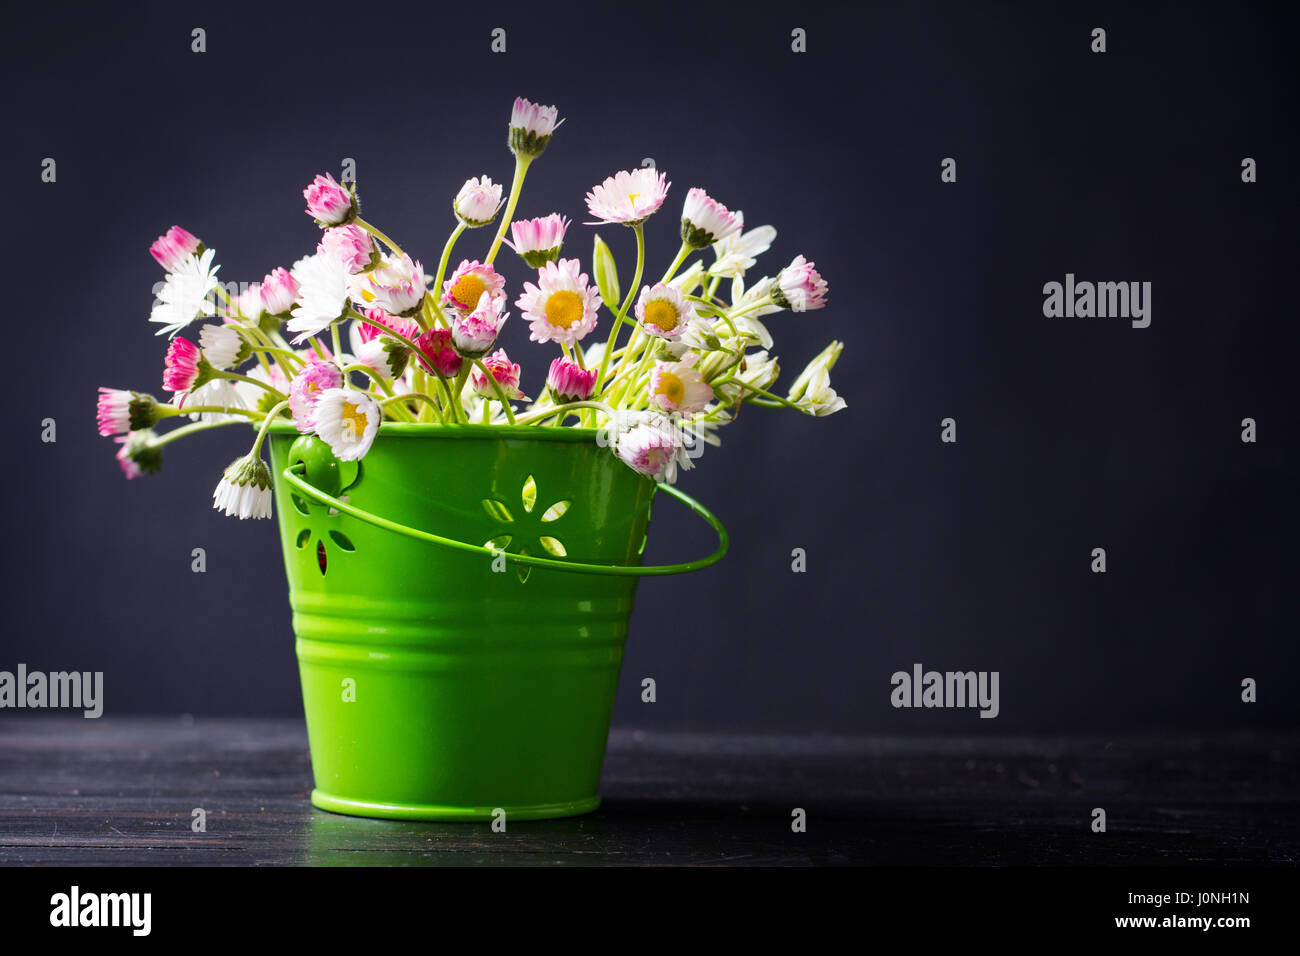 Daisy flowers in a green pot against black background Stock Photo